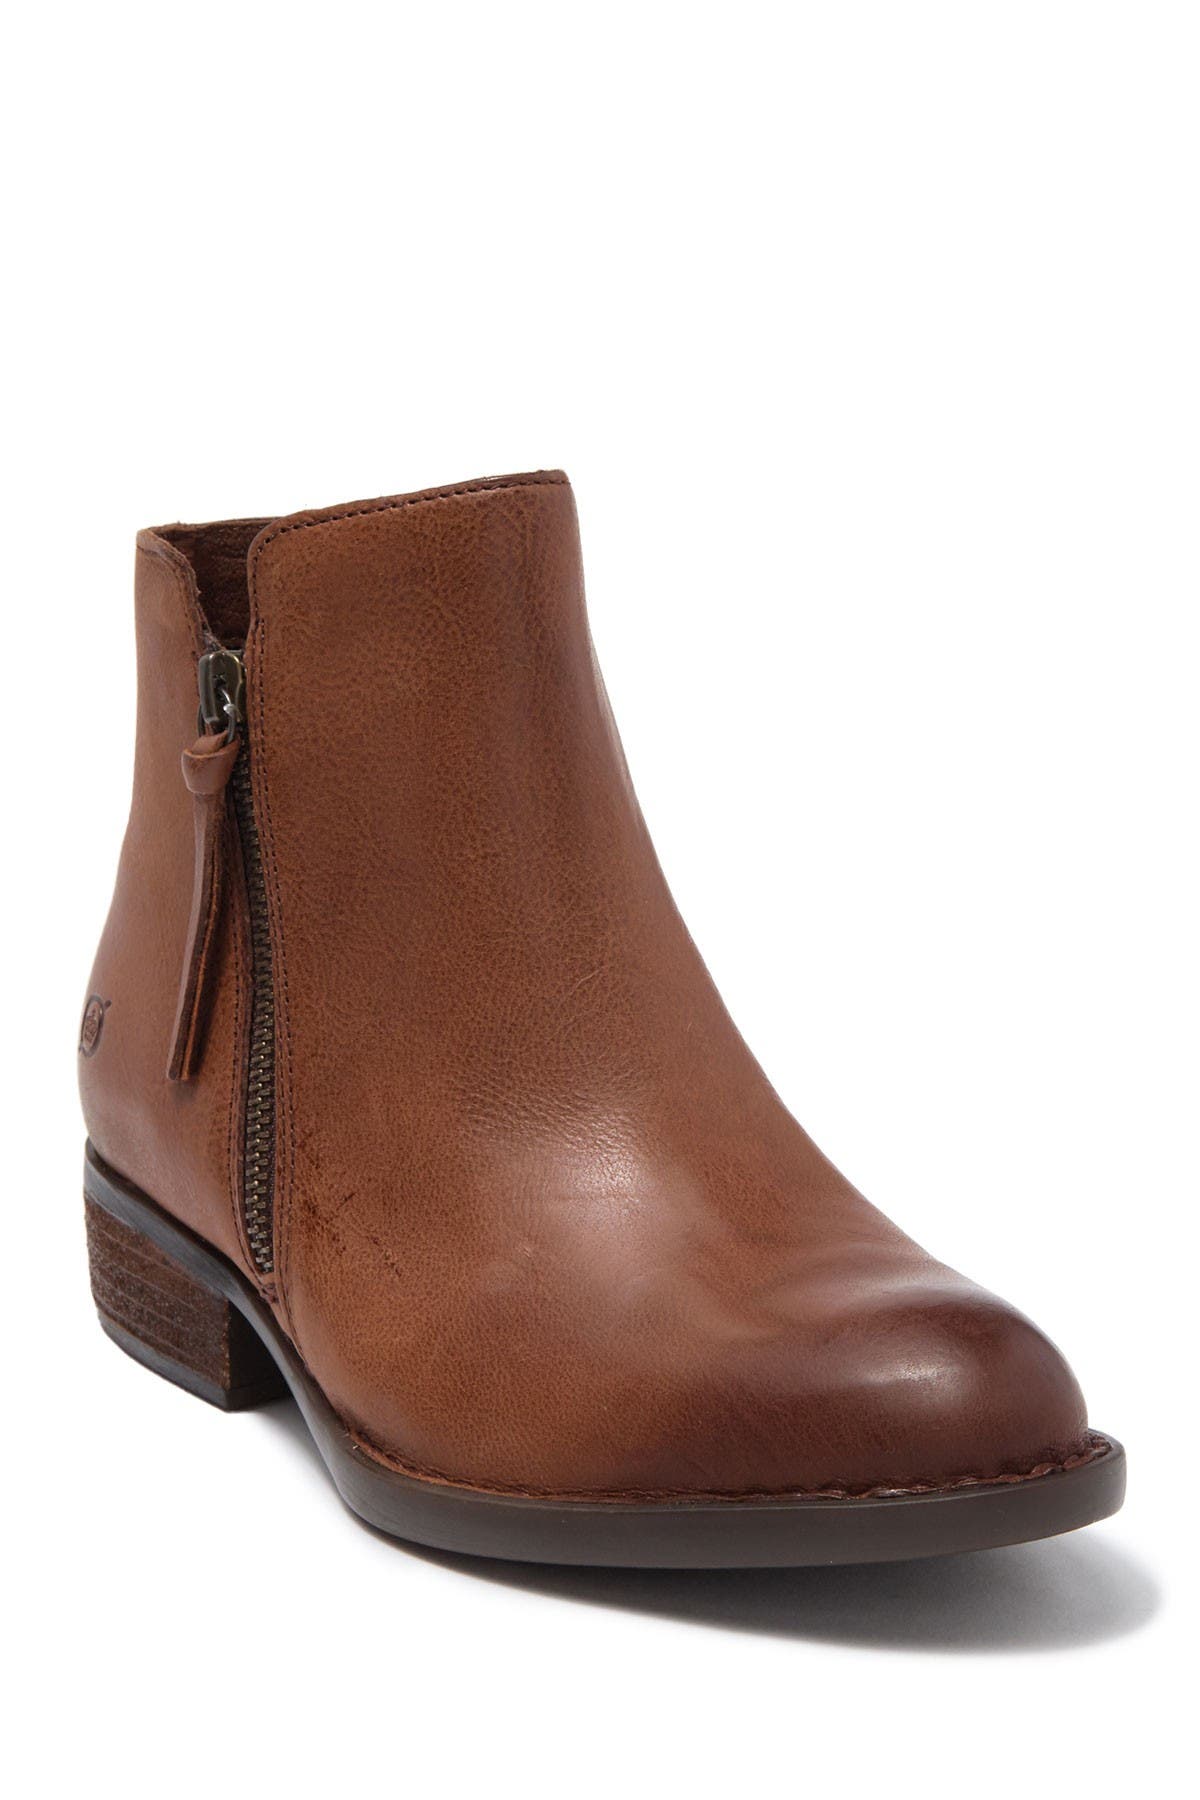 born side zip leather booties